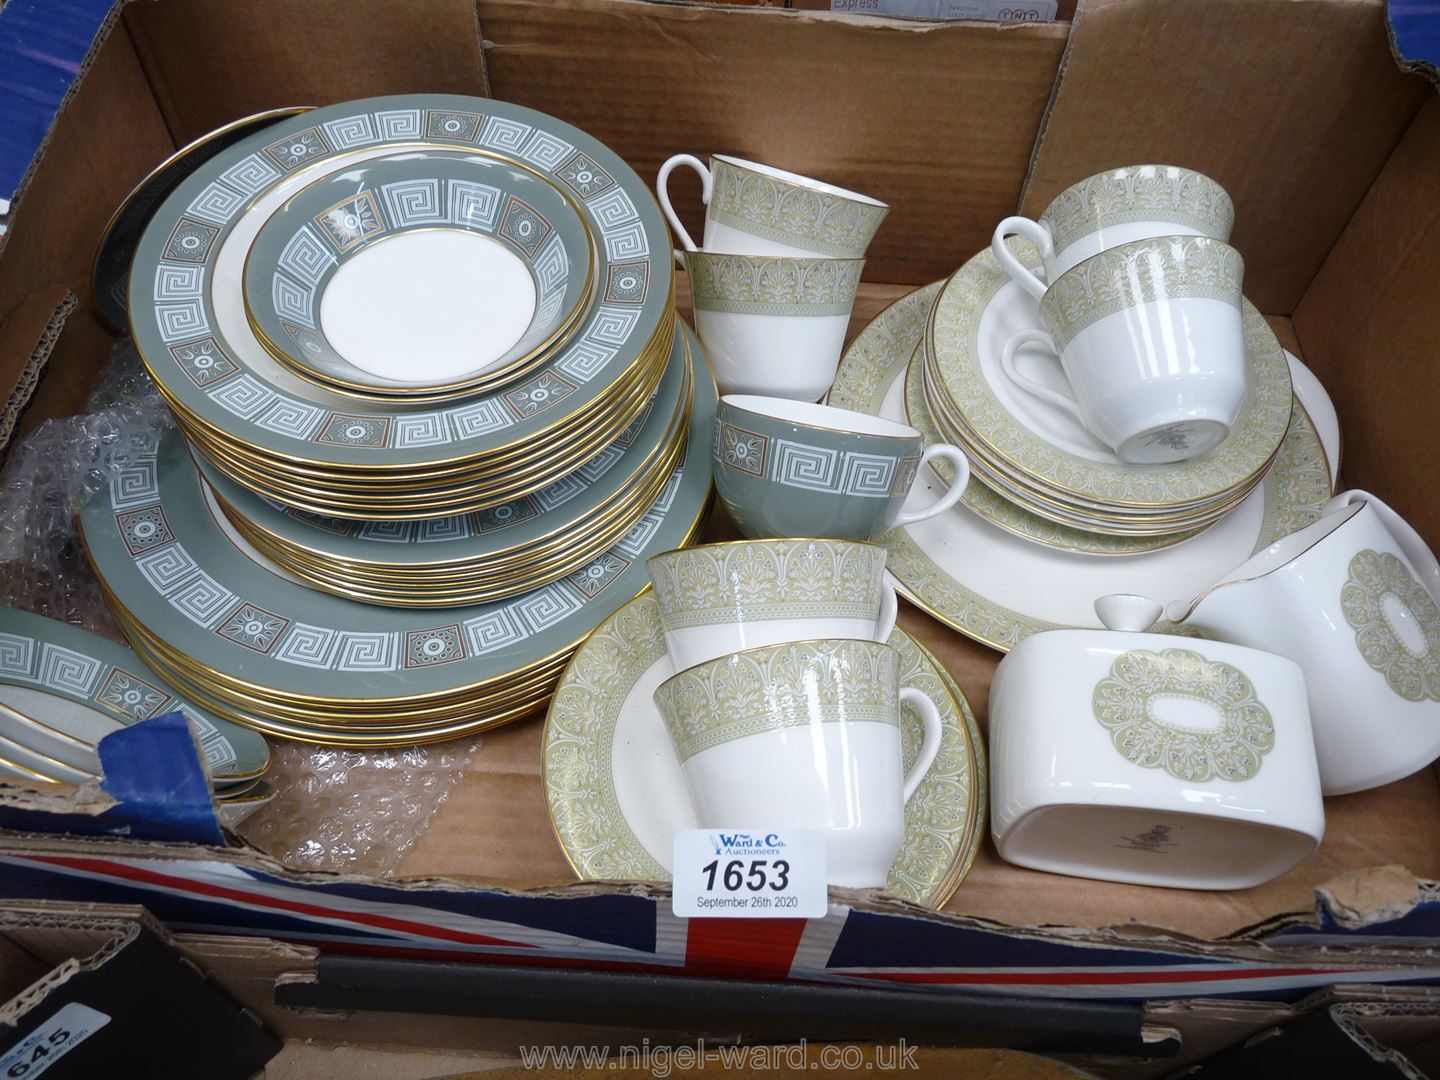 A Royal Doulton 'Sonnet' part Teaset and Wedgwood 'Asia' dinnerware.